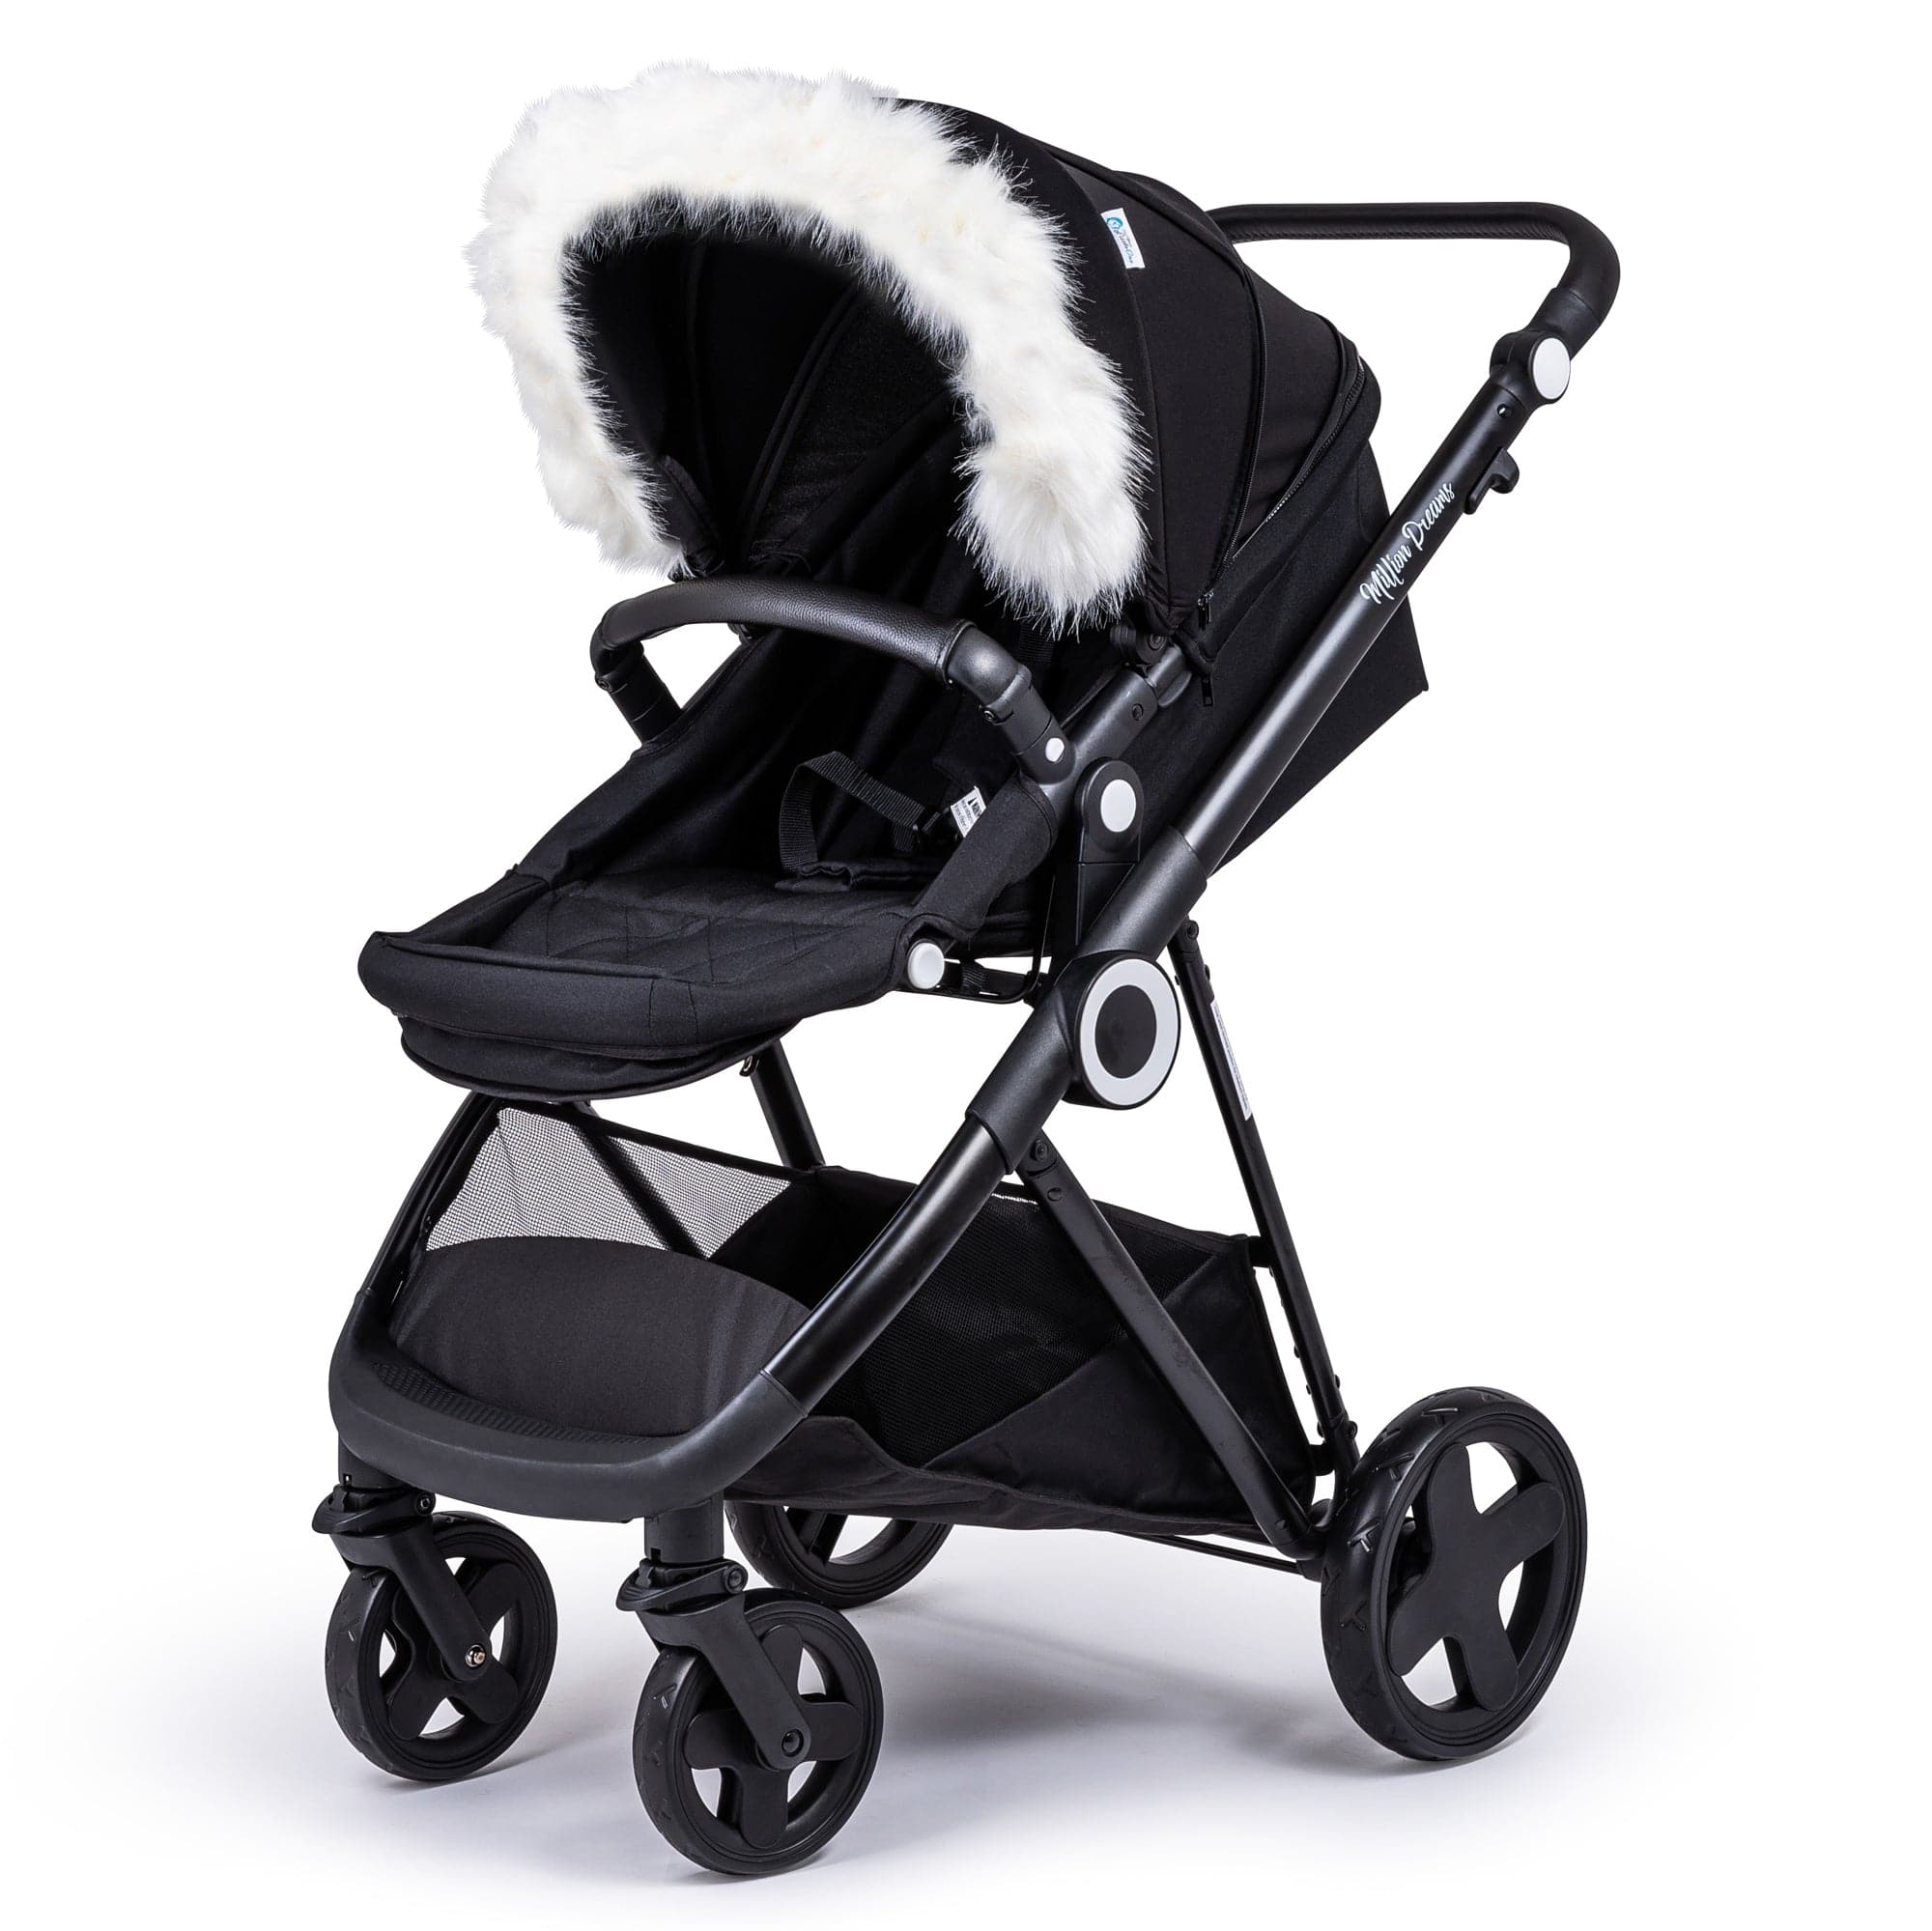 Pram Fur Hood Trim Attachment For Pushchair Compatible with Nuna - White / Fits All Models | For Your Little One